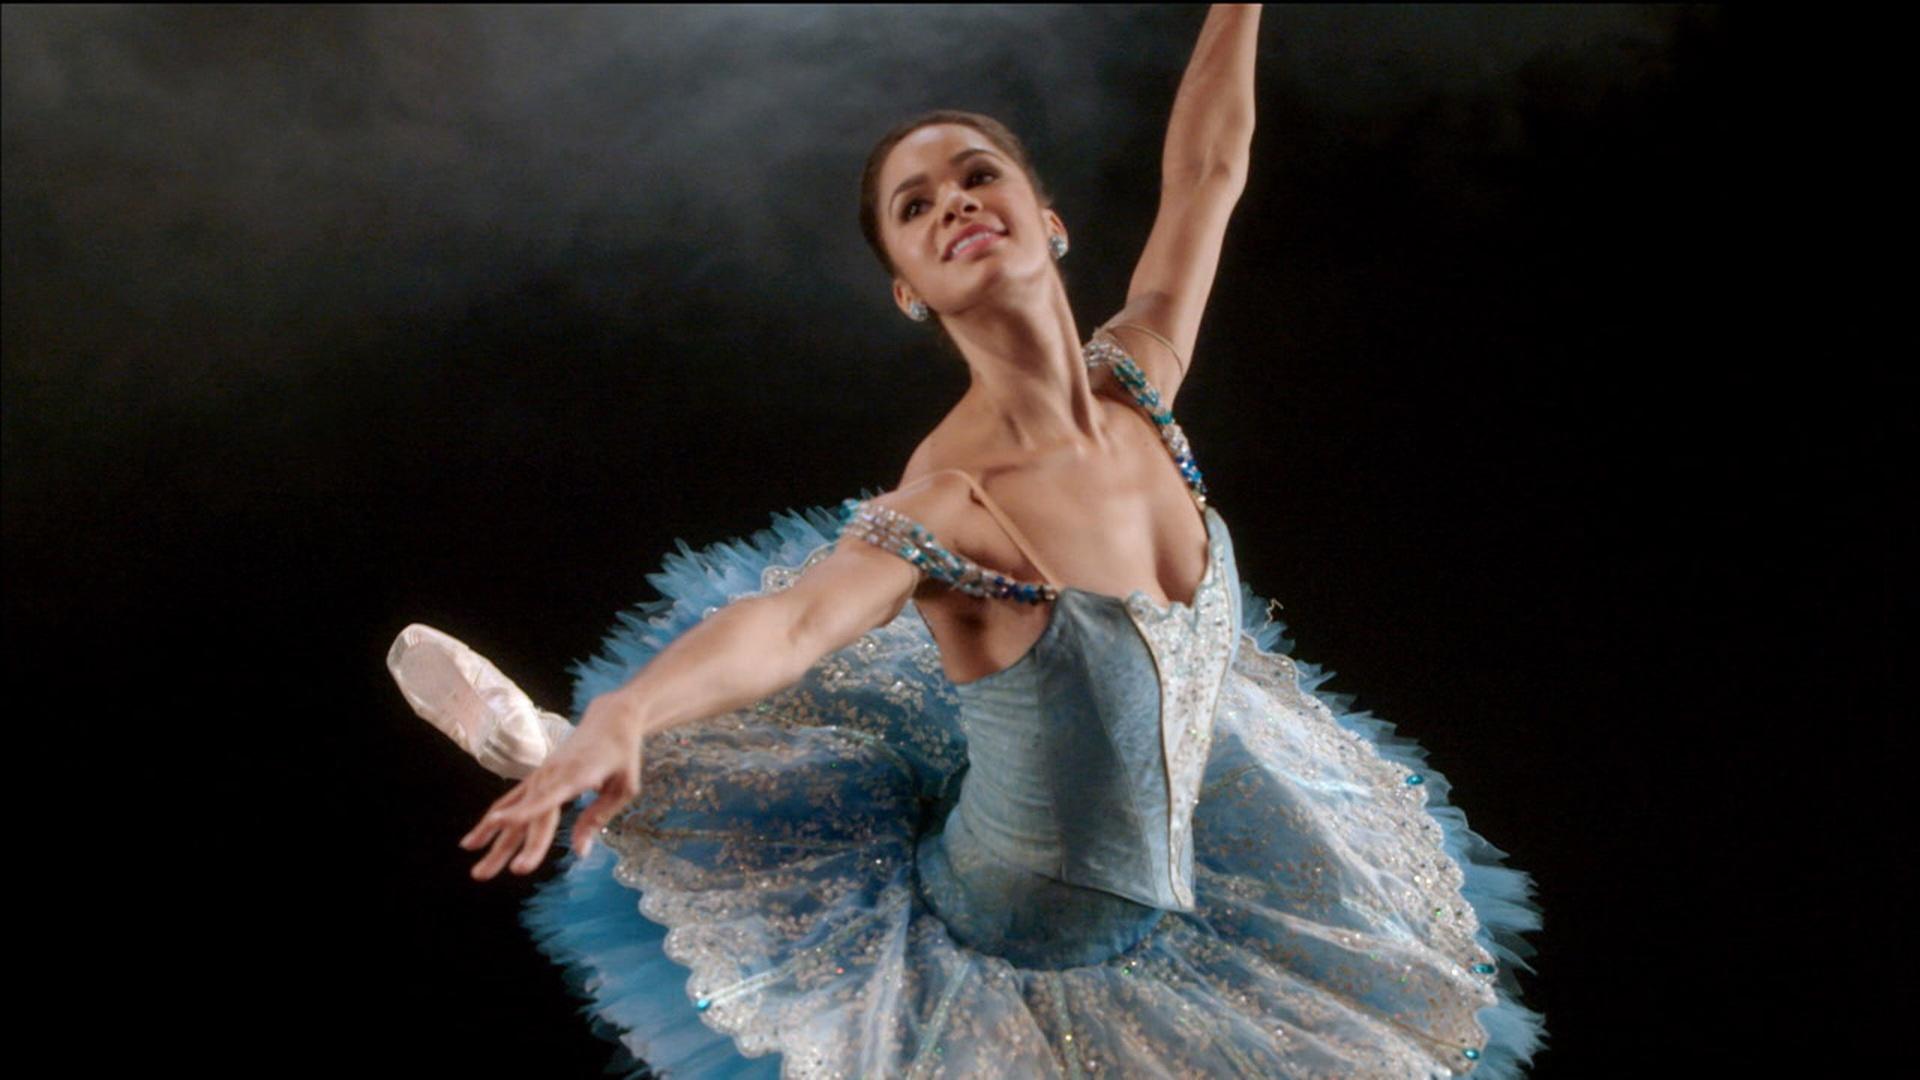 American Ballet Theatre Soloist Misty Copeland is the 